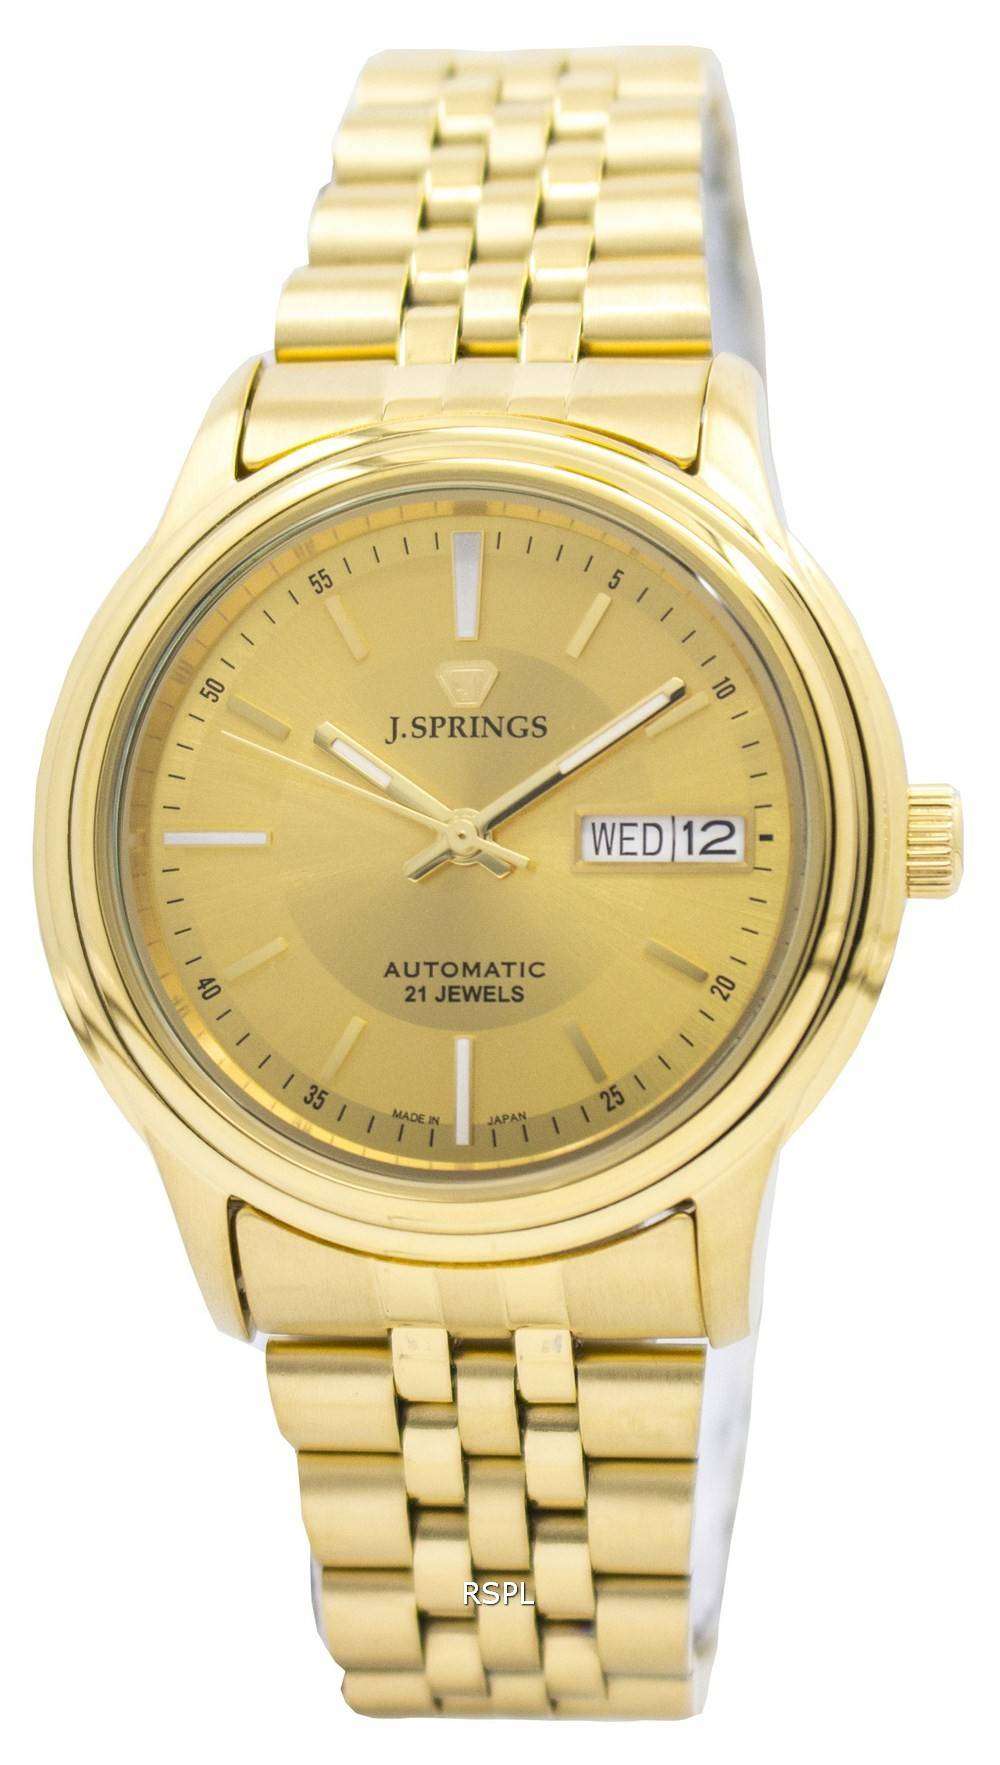  by Seiko Automatic 21 Jewels Japan Made BEB541 Men's Watch -  DownUnderWatches